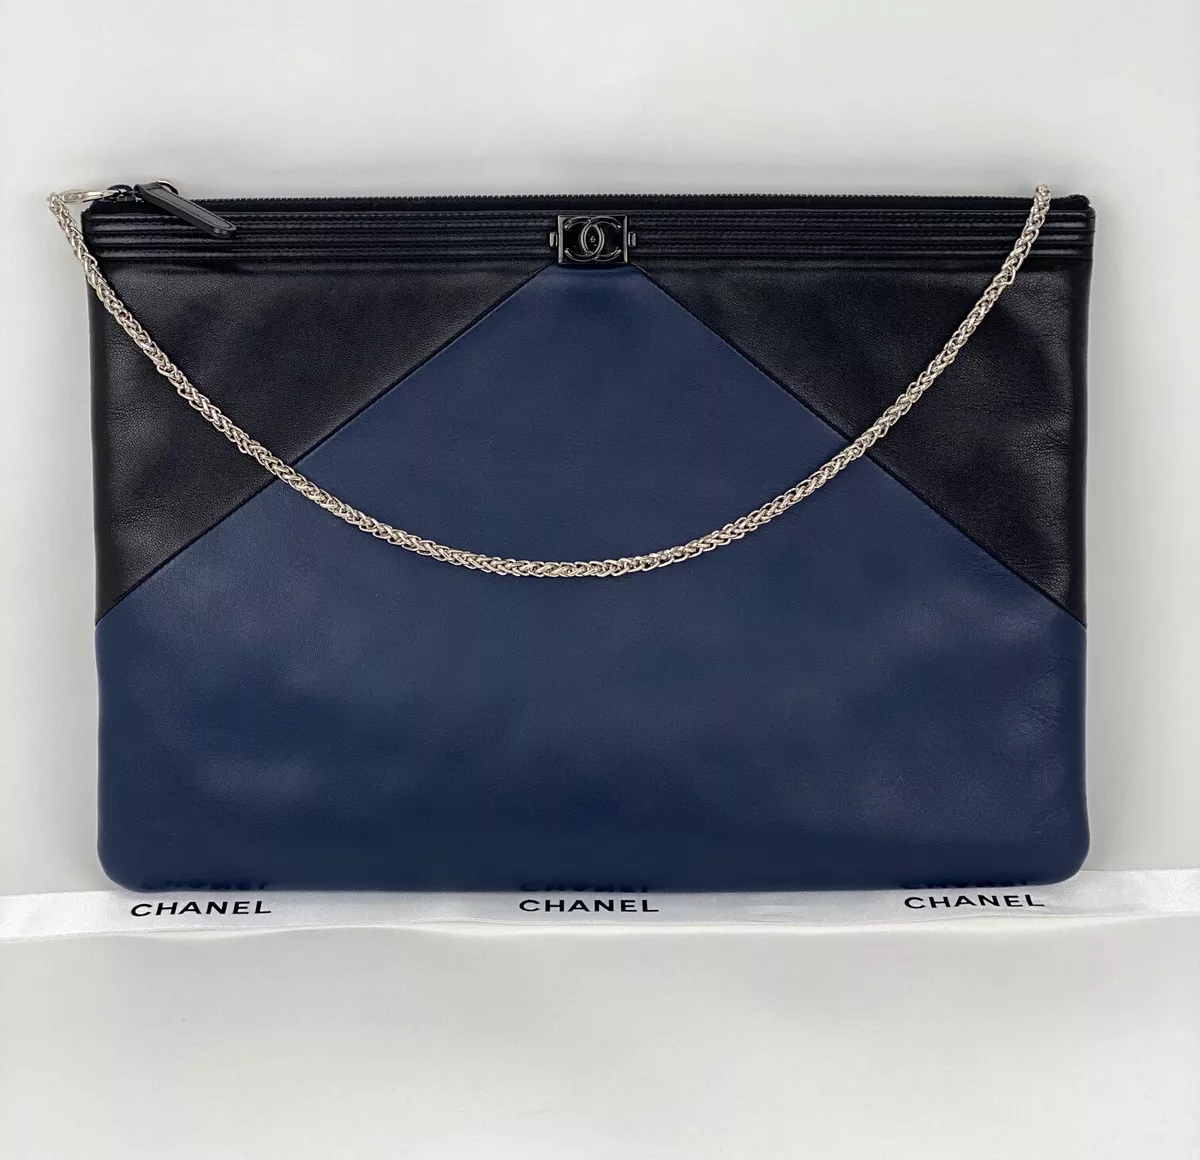 Chanel Bag Quilted Lambskin Leather Blue Large Boy Zip Pouch Added Chain  B374